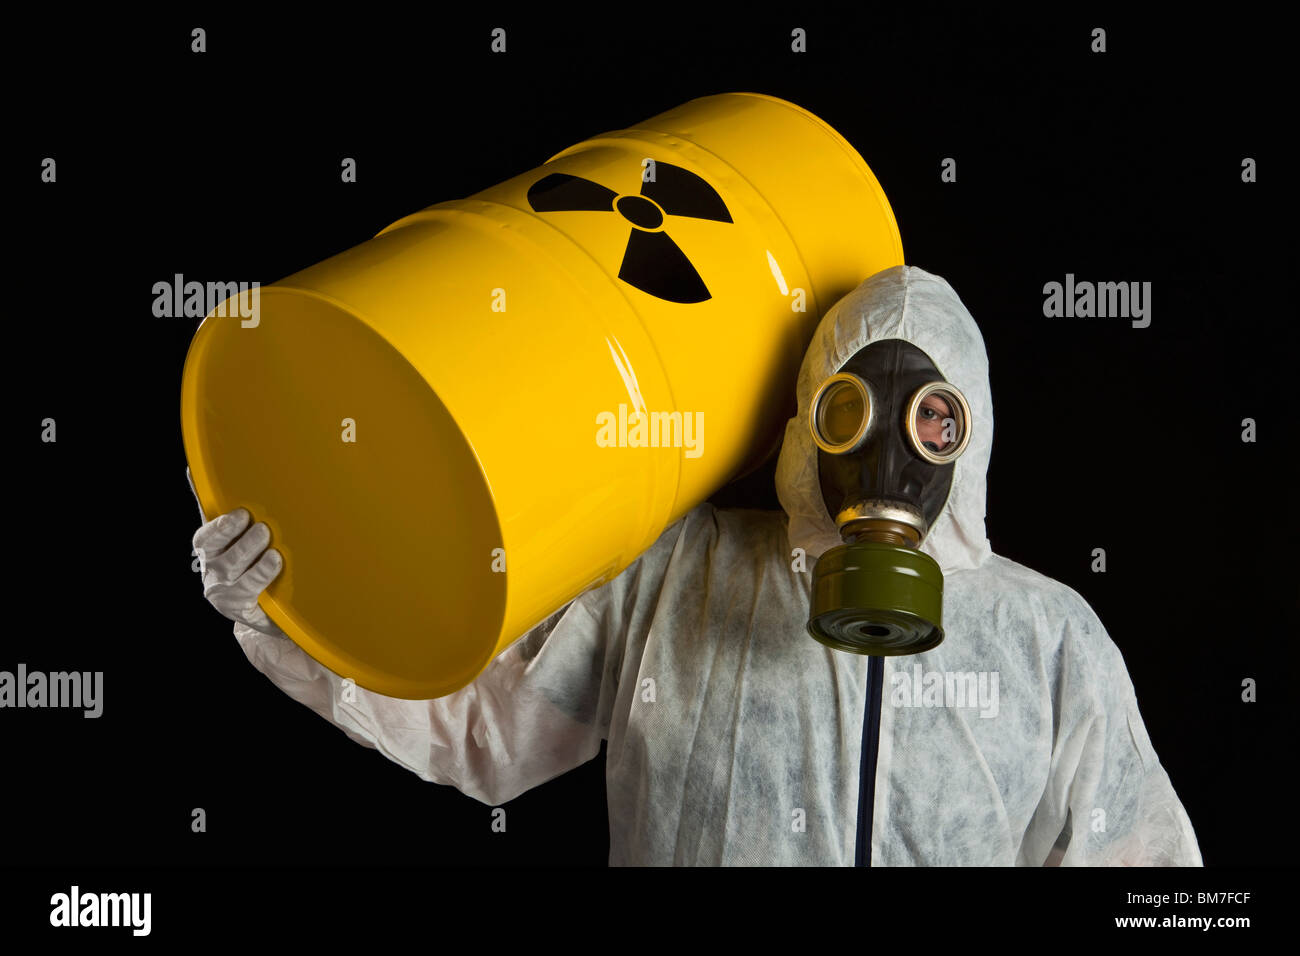 A Person Carrying A Radioactive Barrel And Wearing Protective Clothing Stock Photo